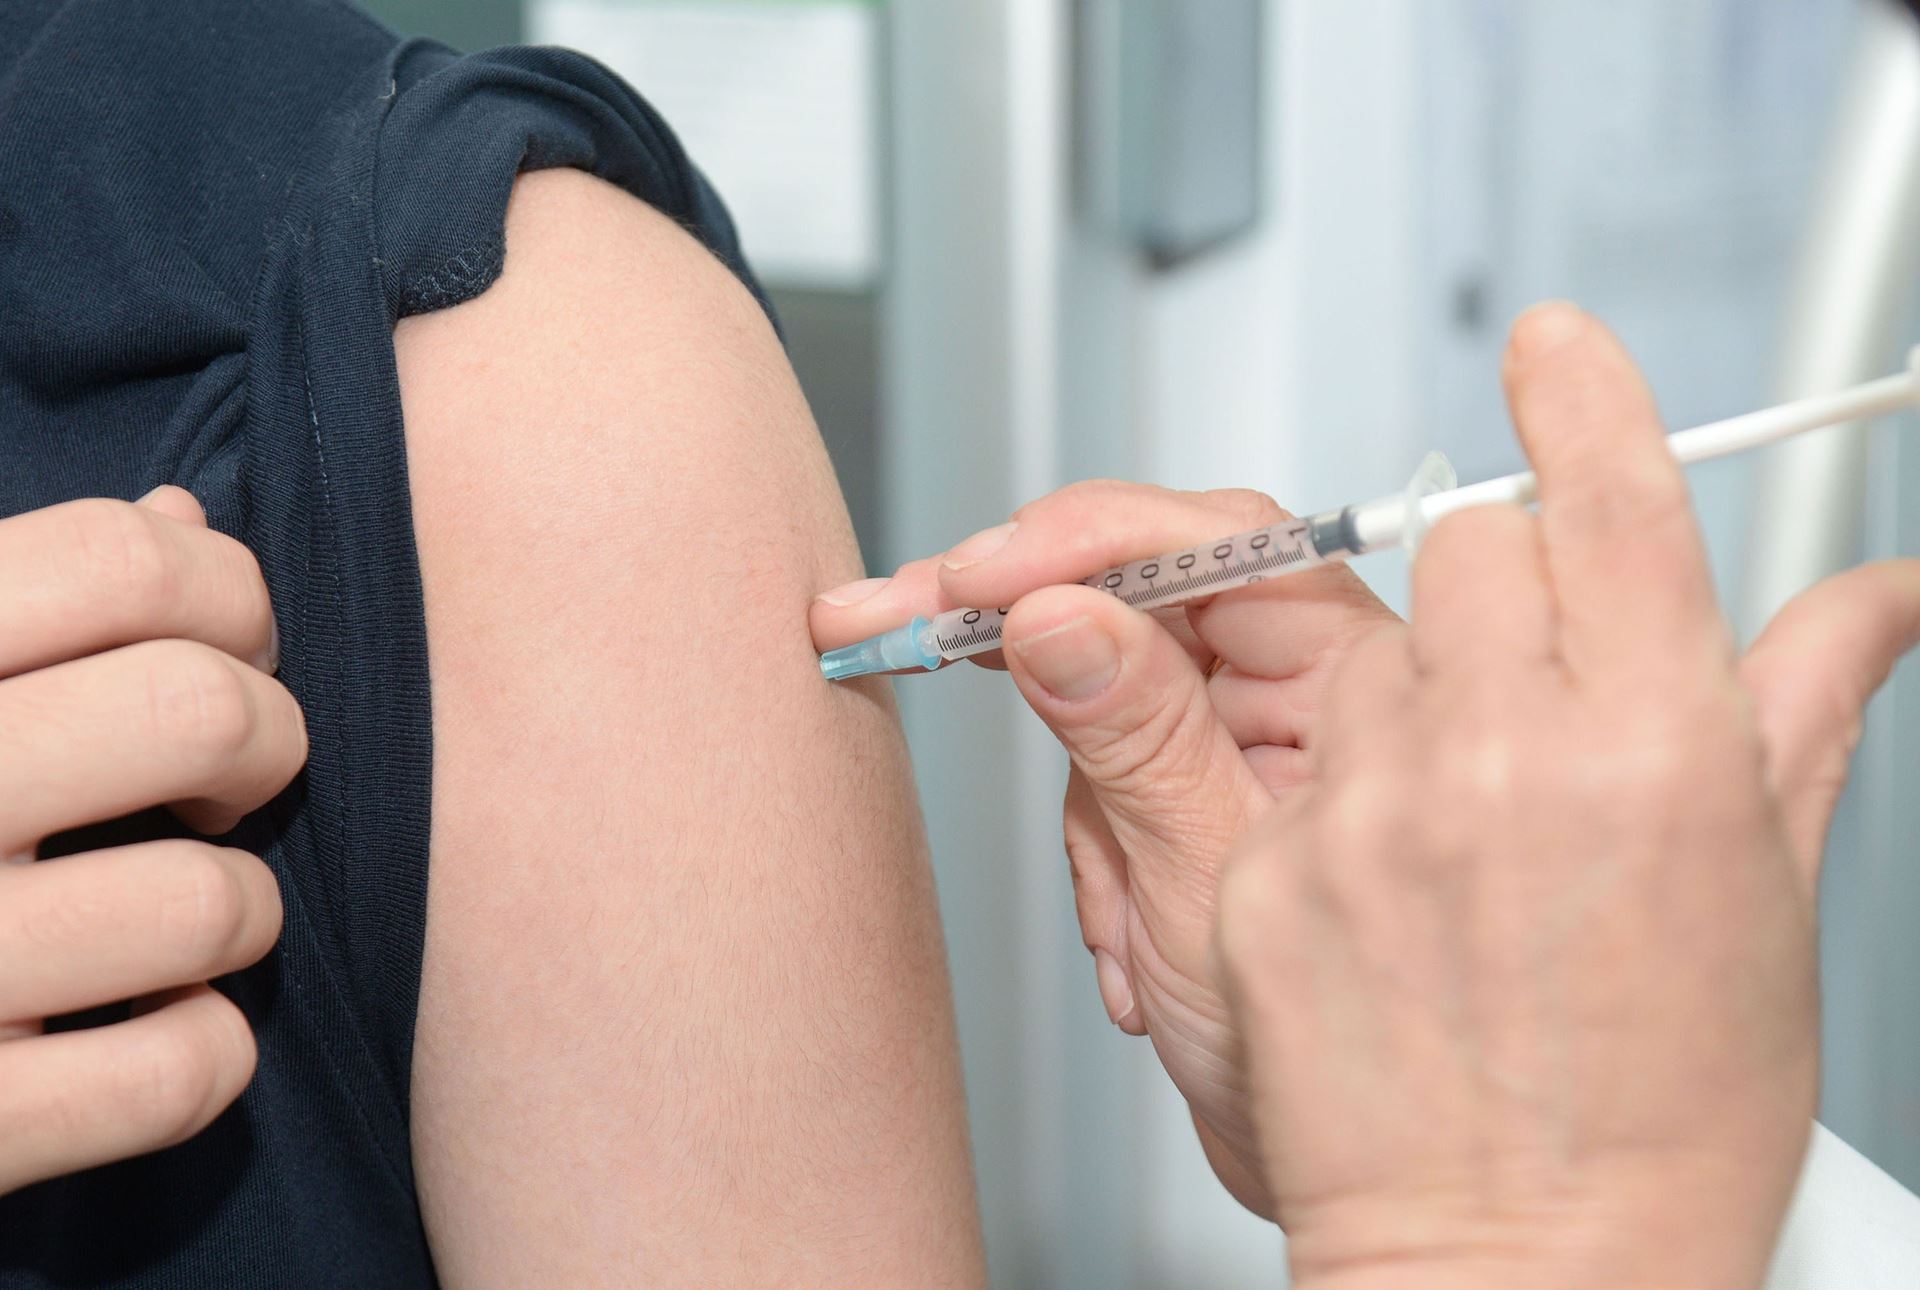 a person being injected in the arm with a needle